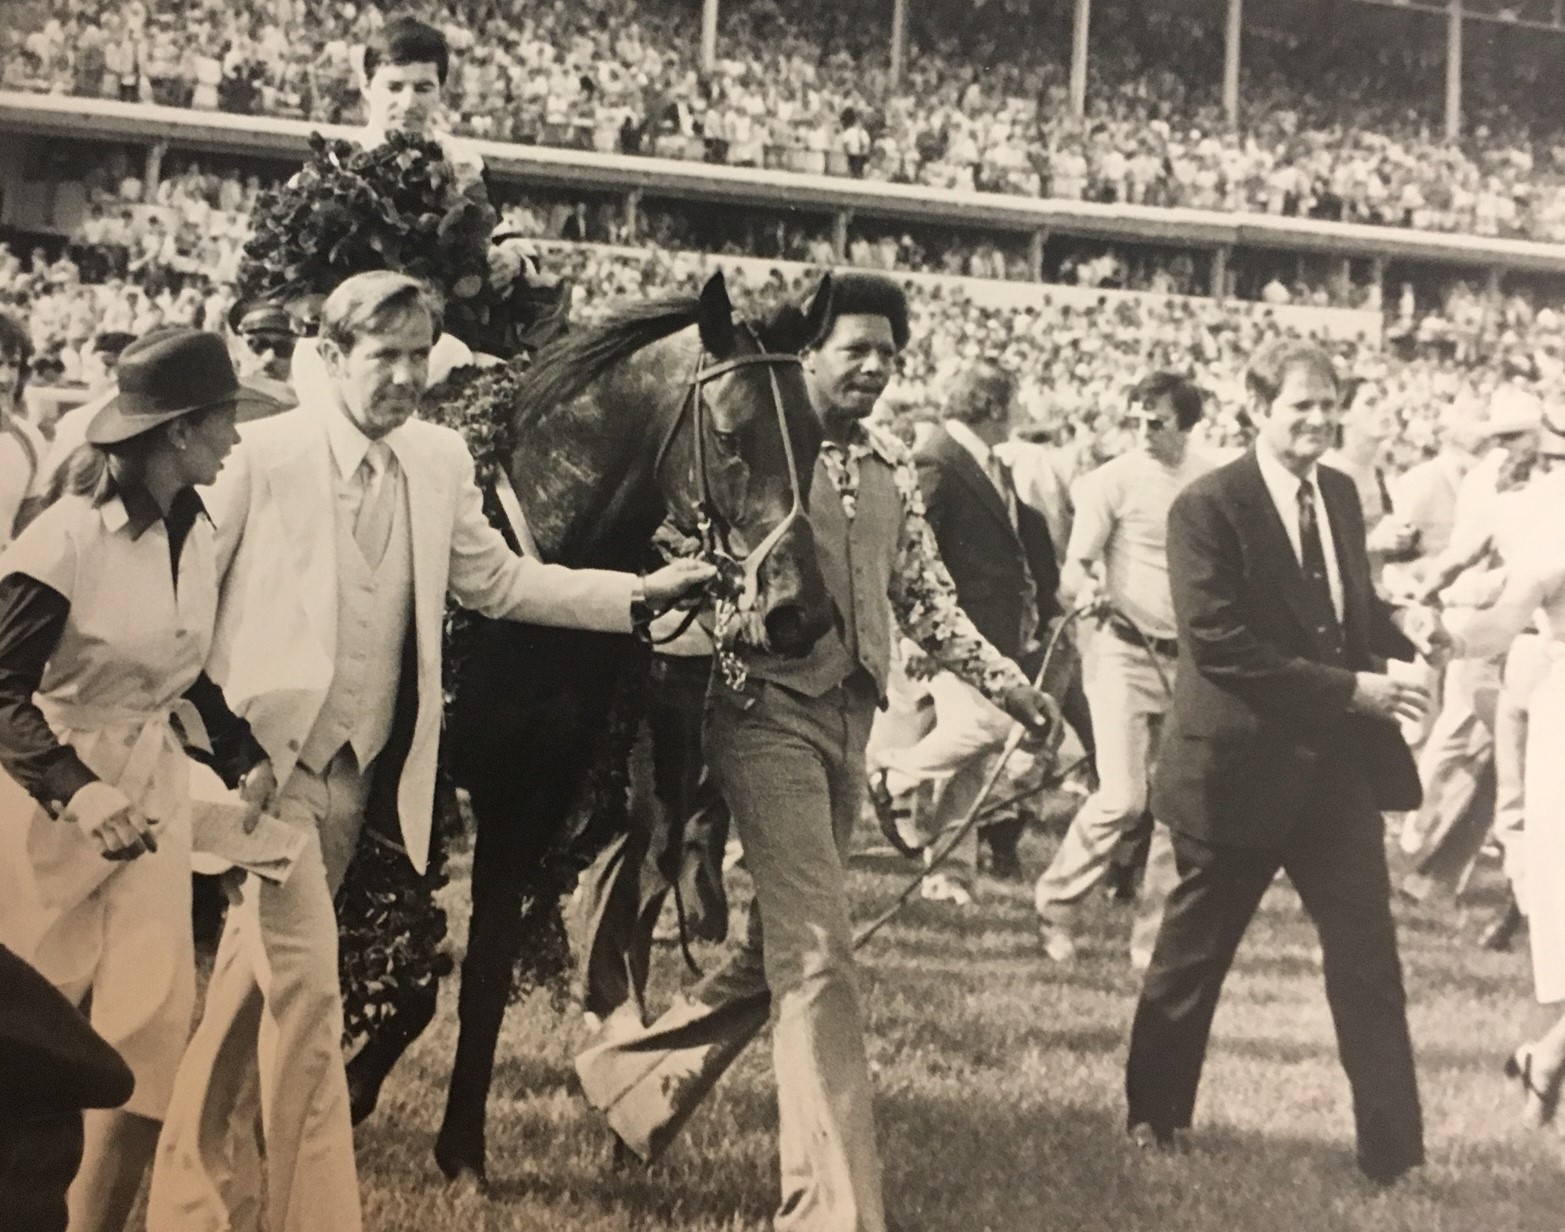 Keeneland Library Featherston Collection - Seattle Slew after 1977 Kentucky Derby win